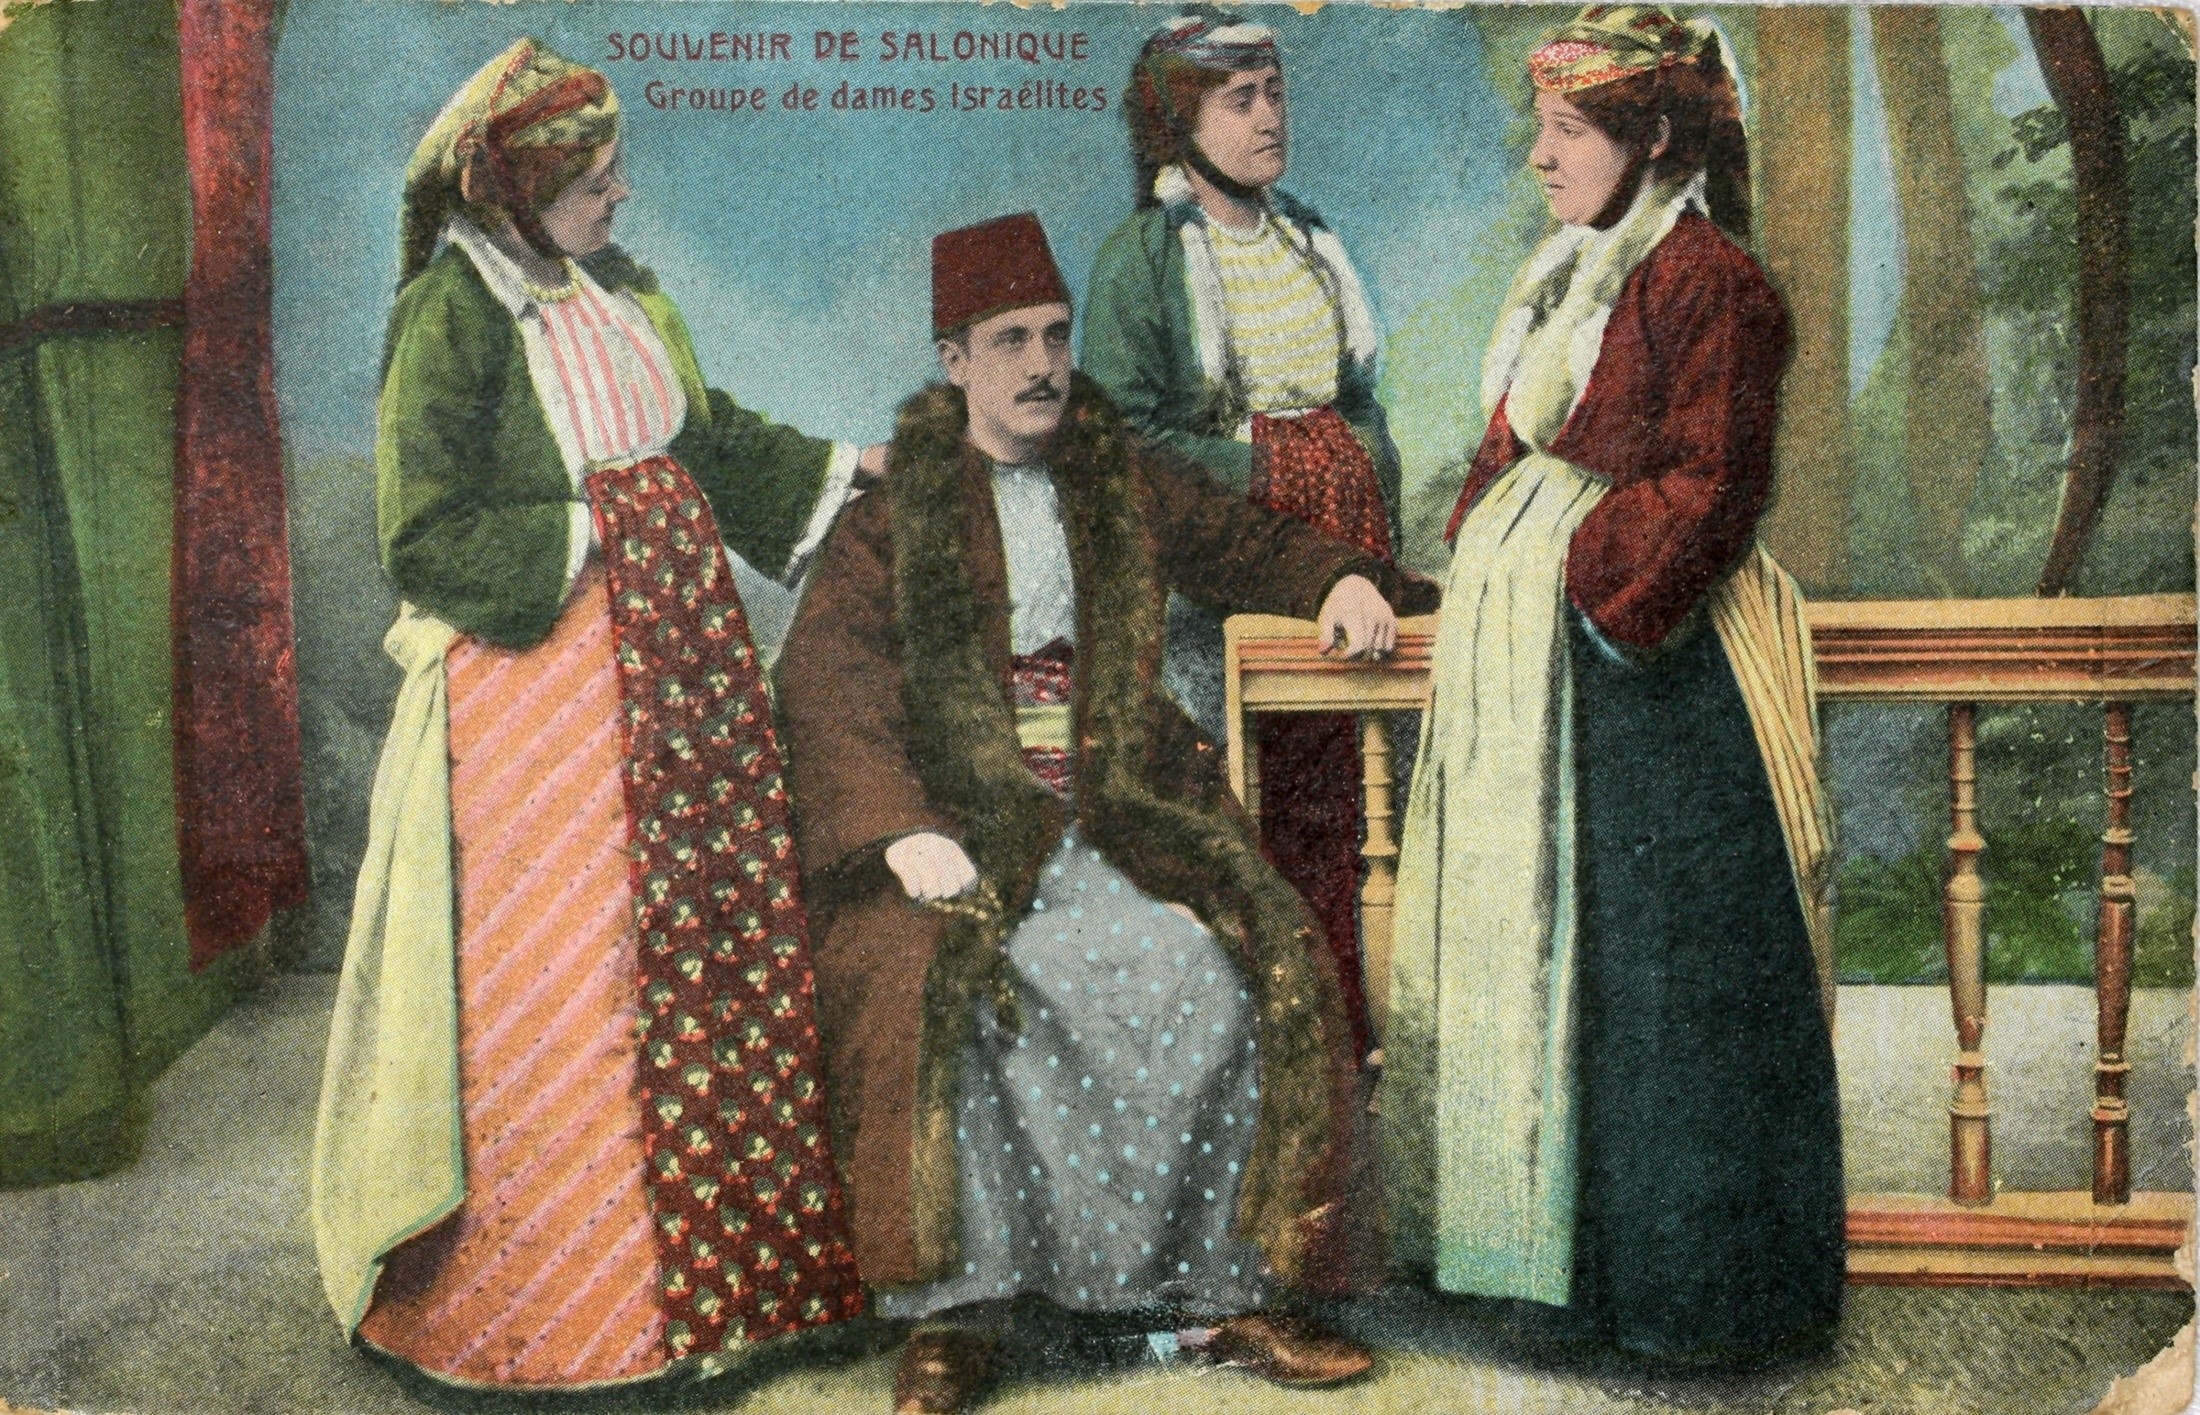 a postcard featuring four Greek Sephardic Jews seated and standing together